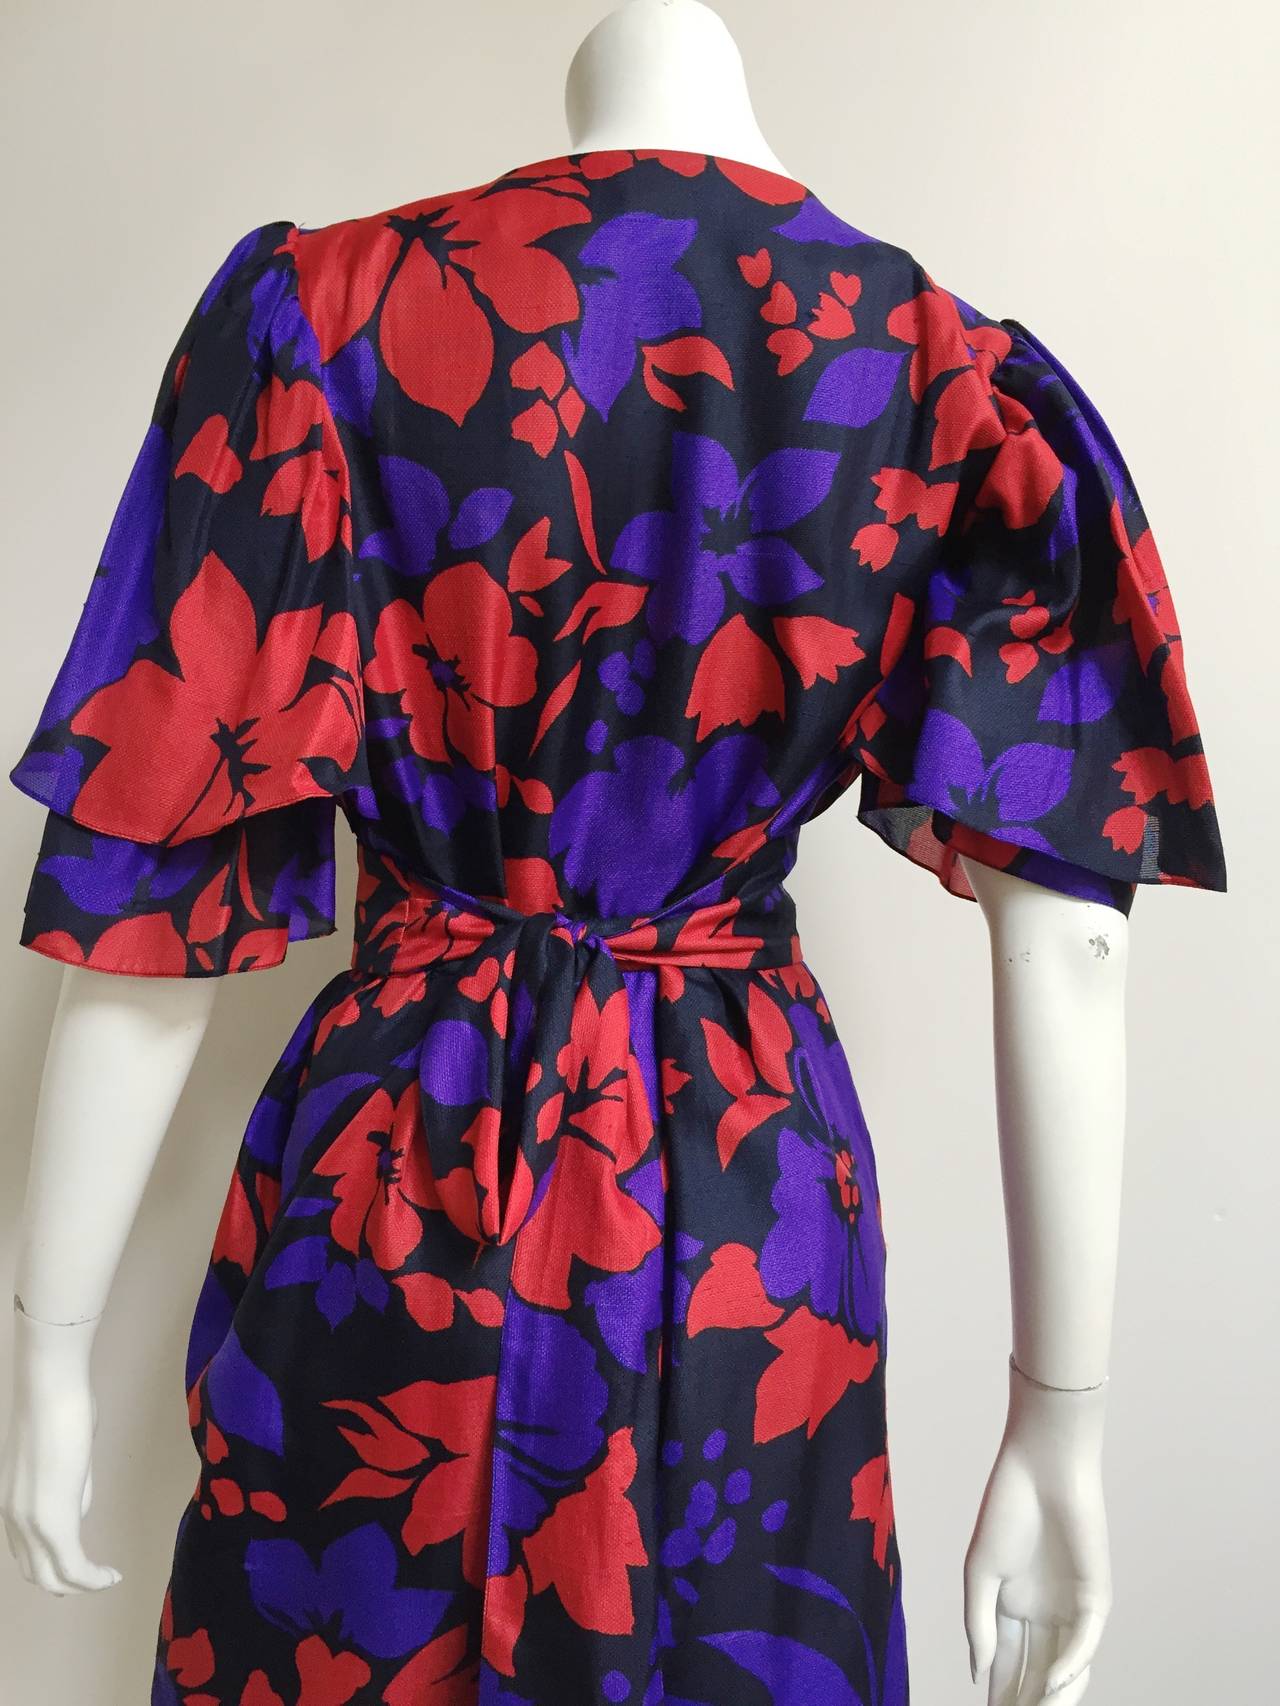 Givenchy 80s flower dress with sash belt size 12. 3